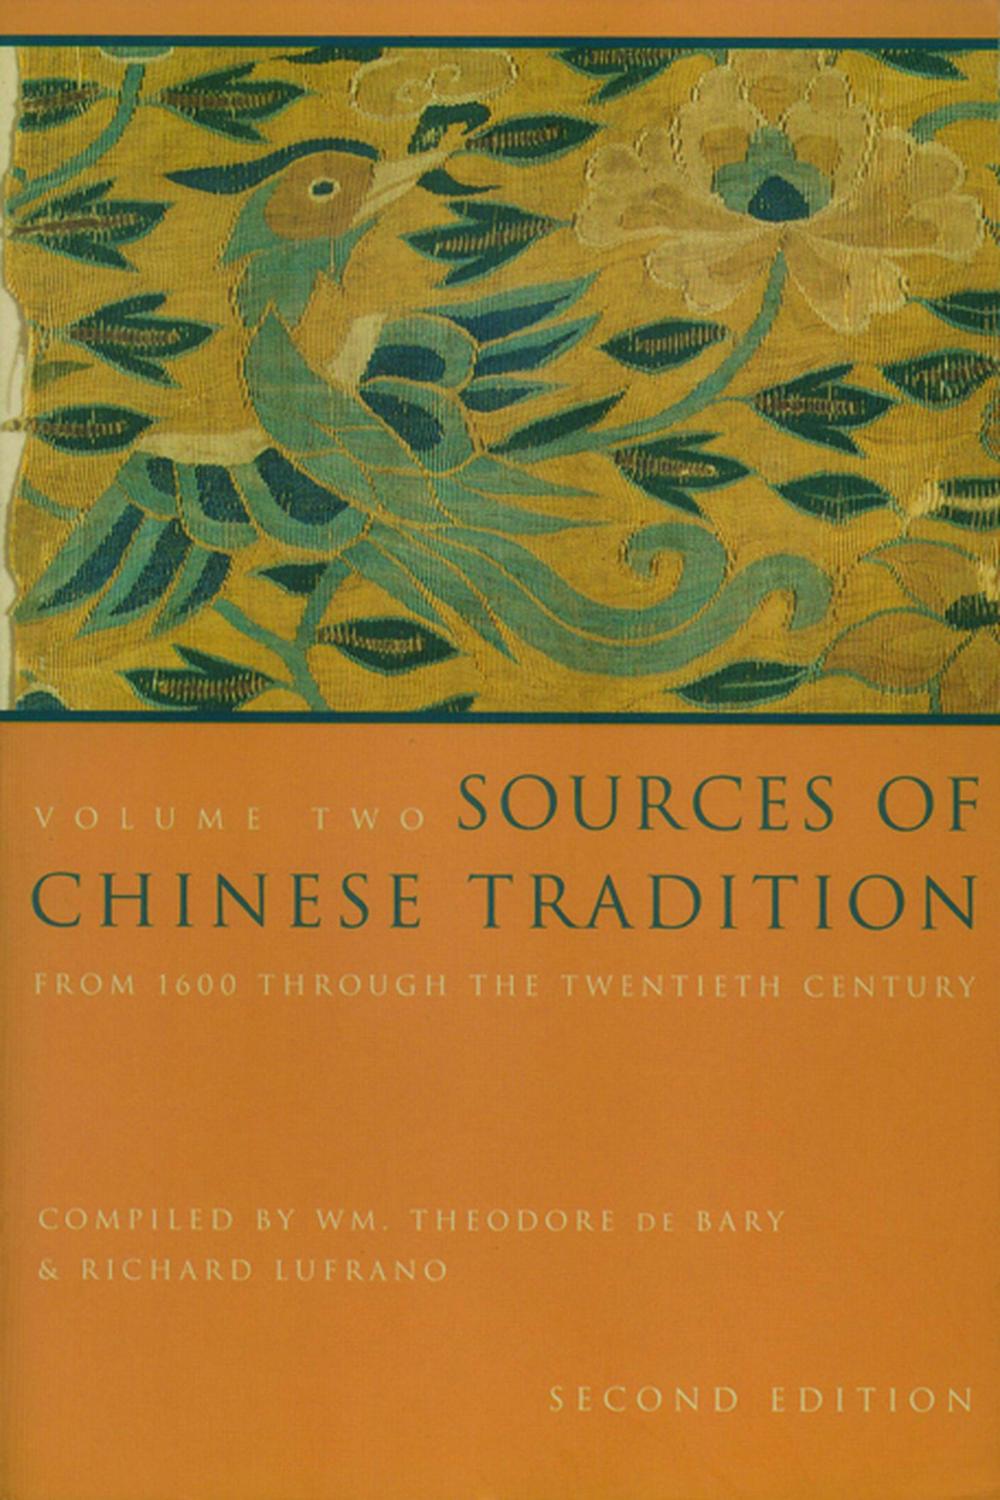 Sources of Chinese Tradition - Wm. Theodore de Bary, Richard Lufrano